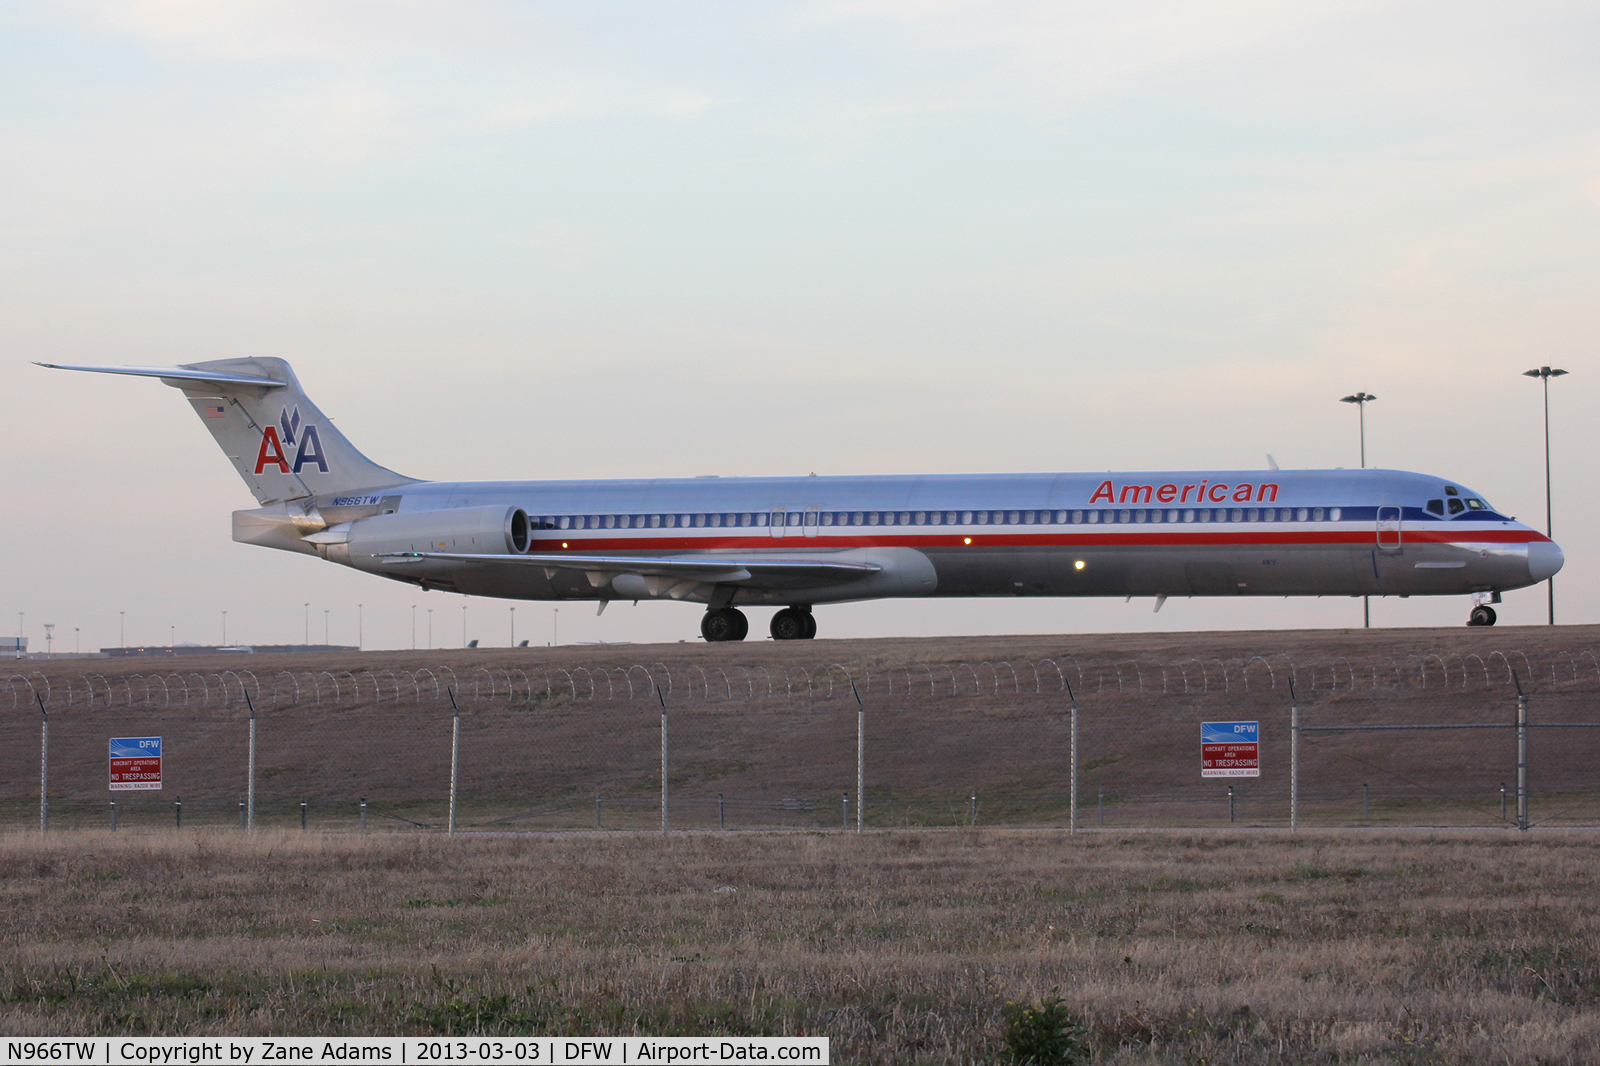 N966TW, 1999 McDonnell Douglas MD-83 (DC-9-83) C/N 53616, American Airlines at DFW Airport